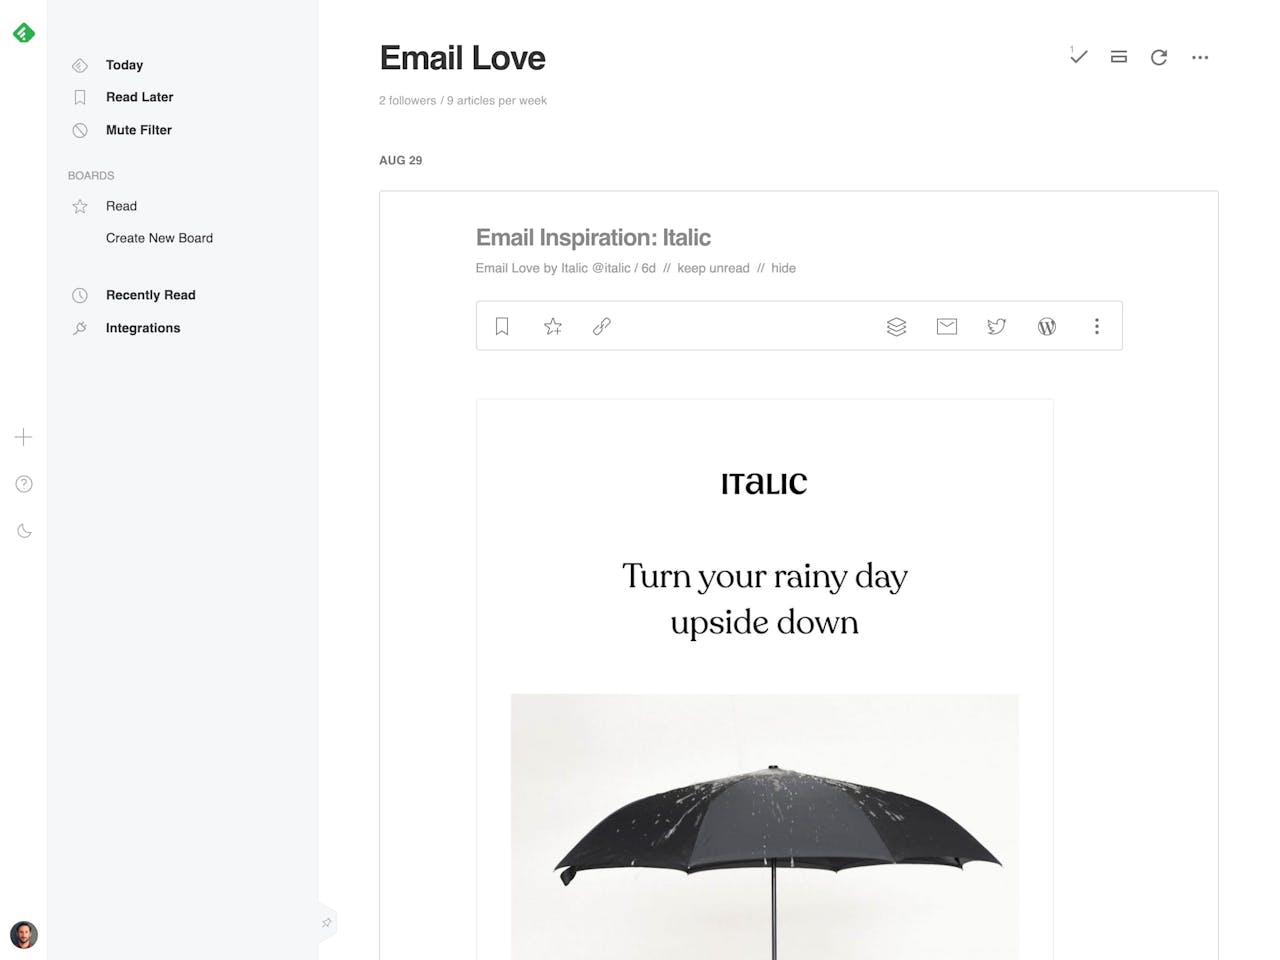 Email Love RSS feed preview on feedly Screenshot